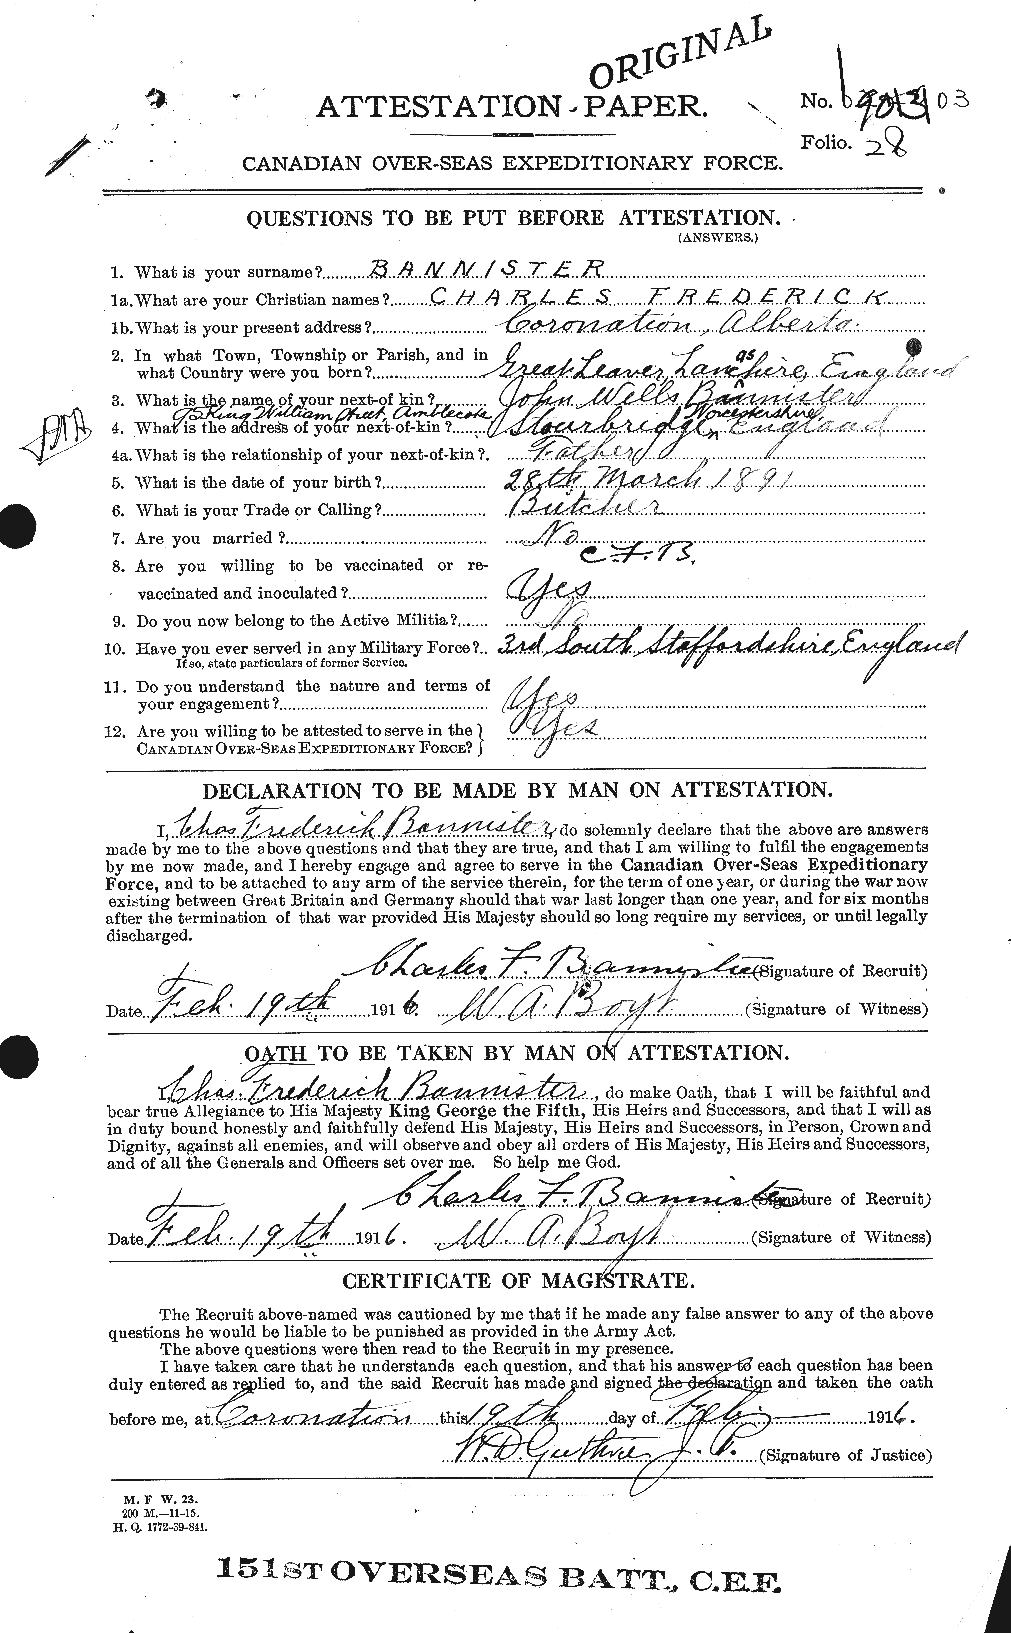 Personnel Records of the First World War - CEF 224809a